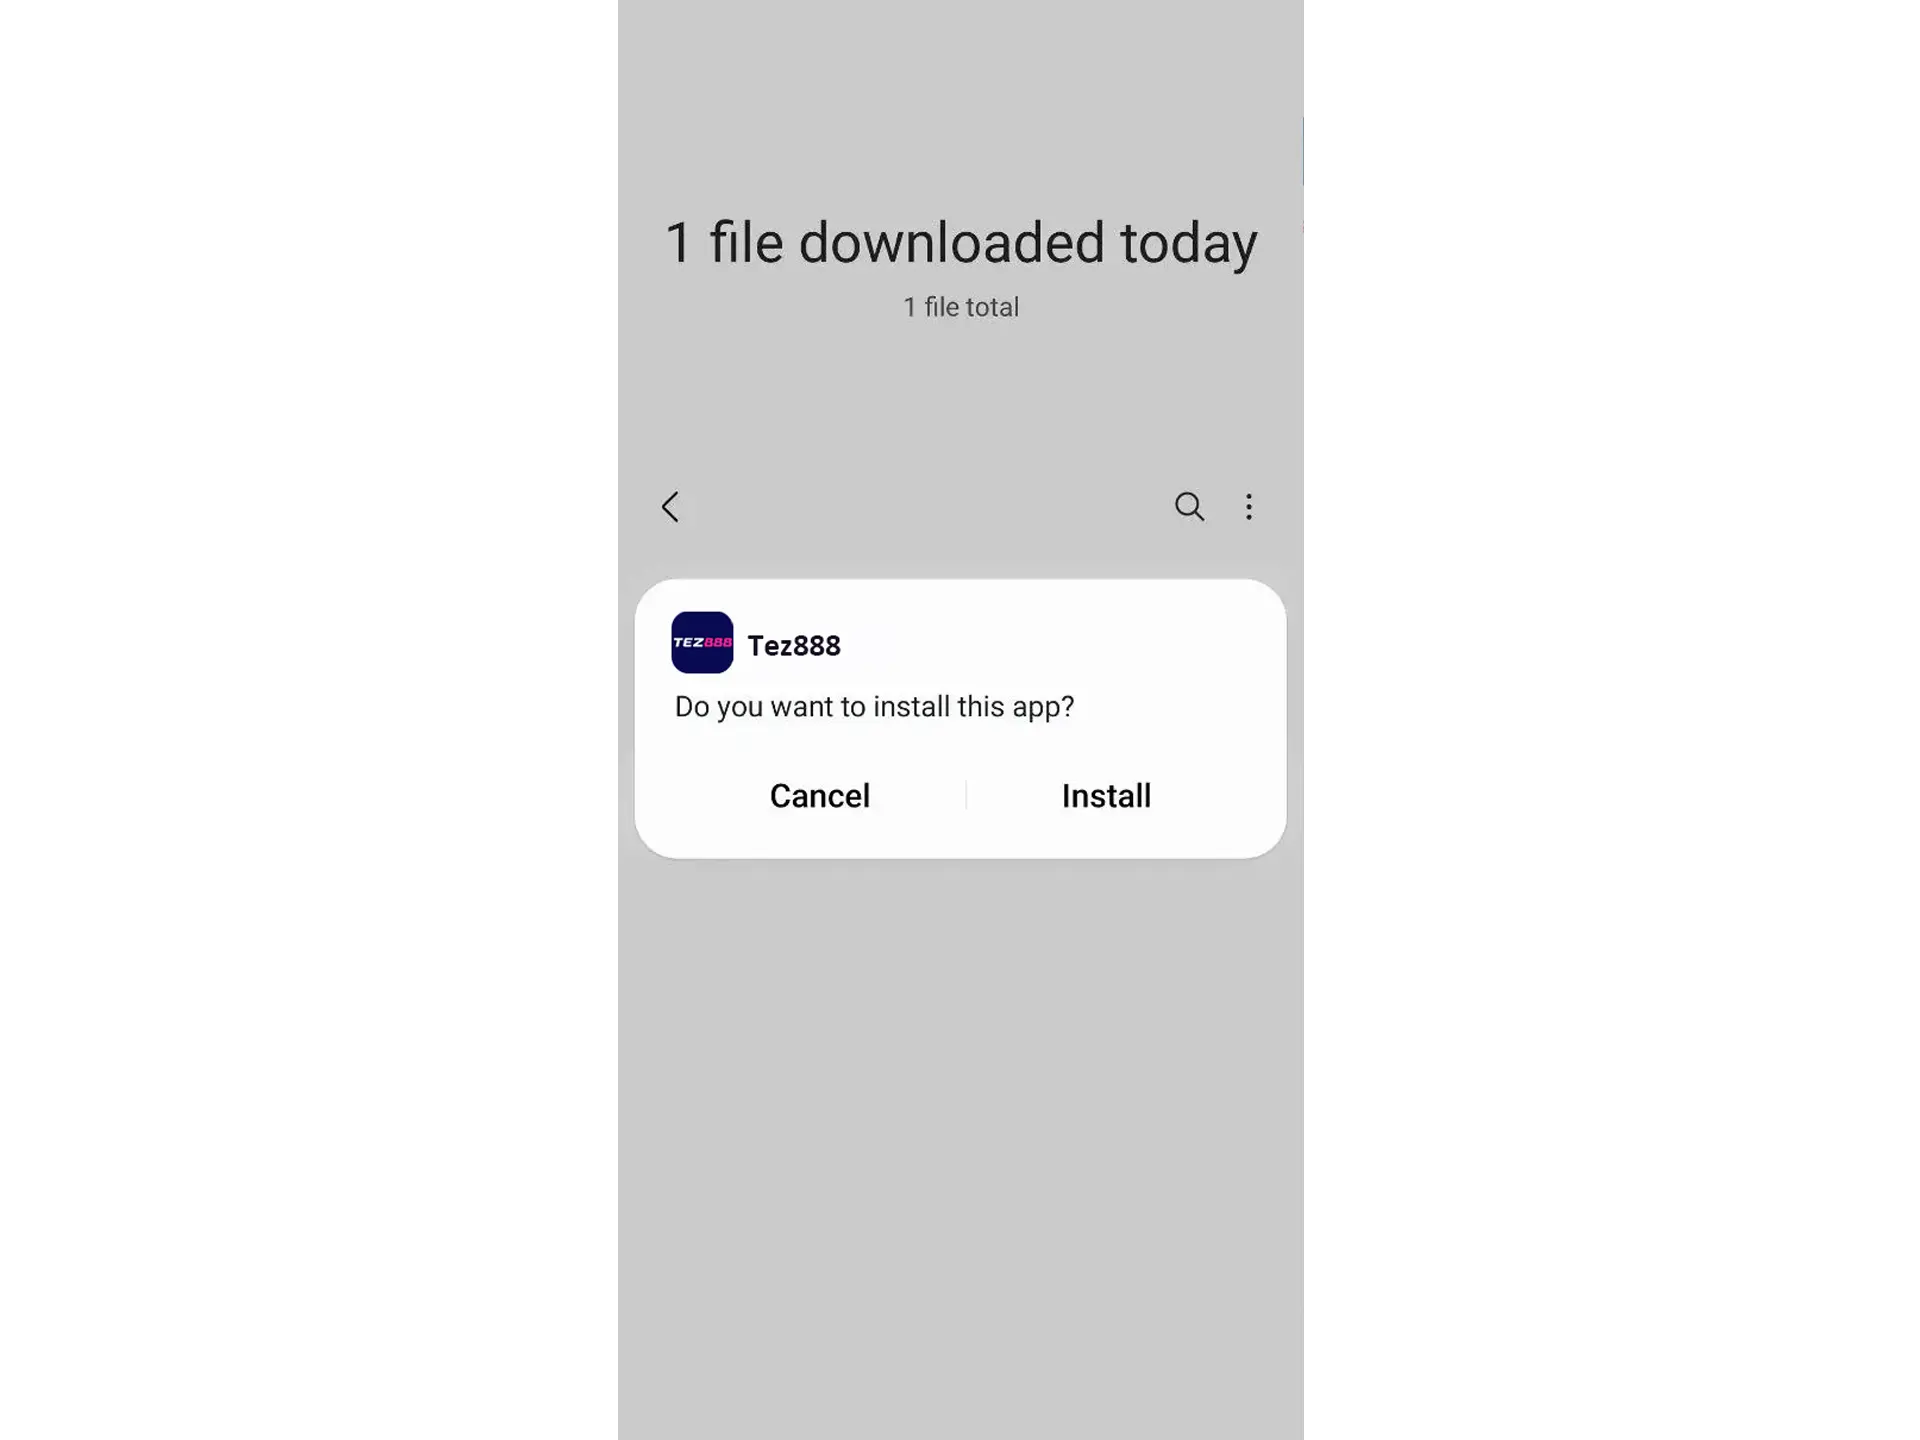 Finish downloading the Apk file to your Android device.